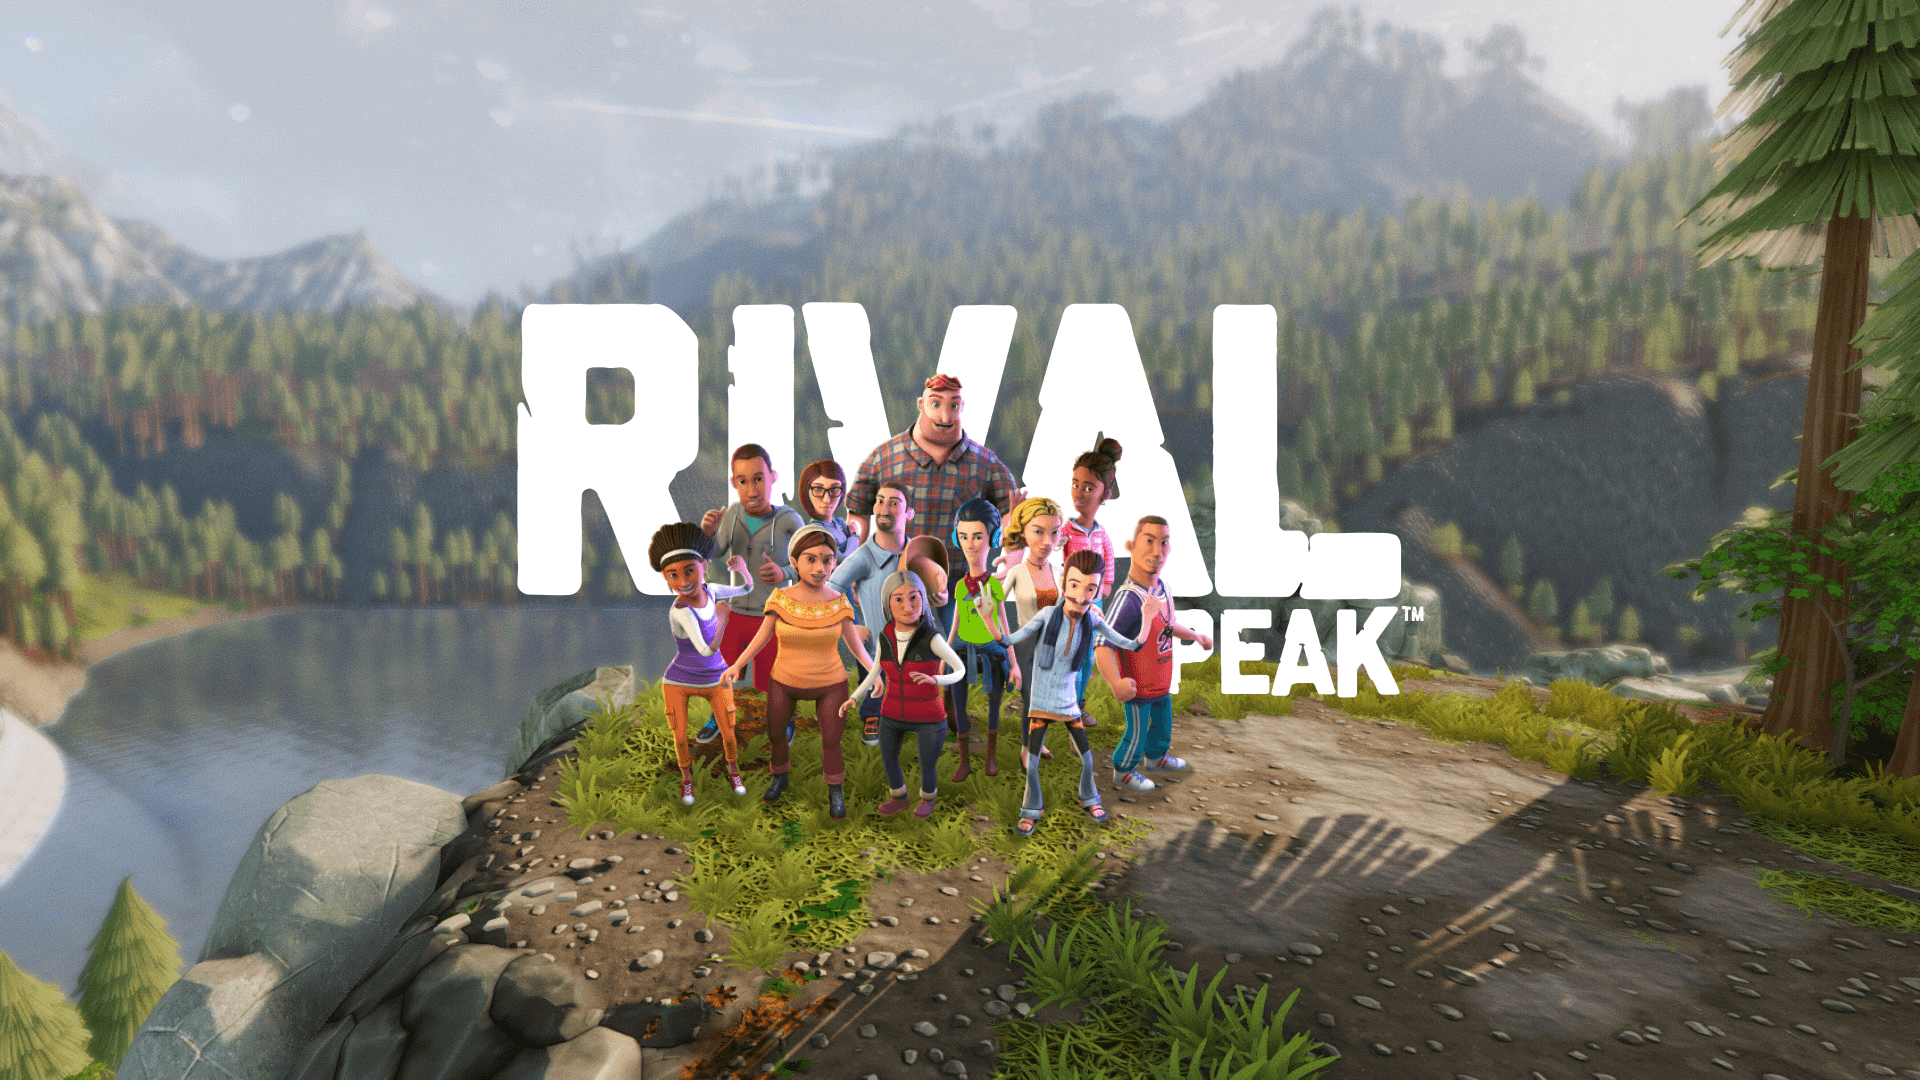 Rival Peak the first public-facing MILE